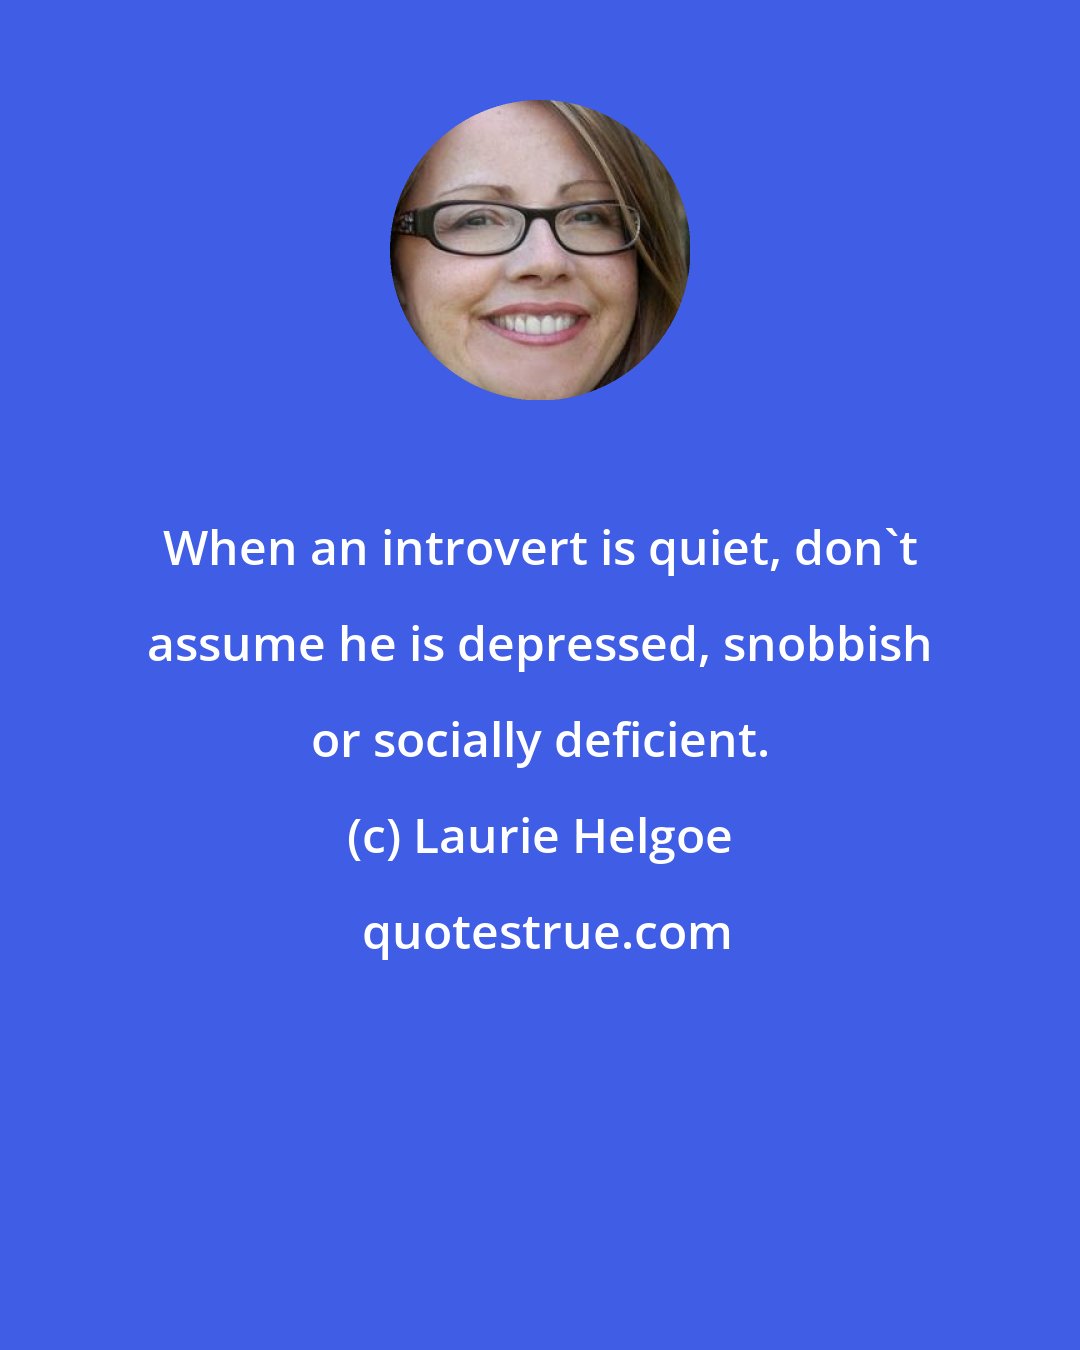 Laurie Helgoe: When an introvert is quiet, don't assume he is depressed, snobbish or socially deficient.